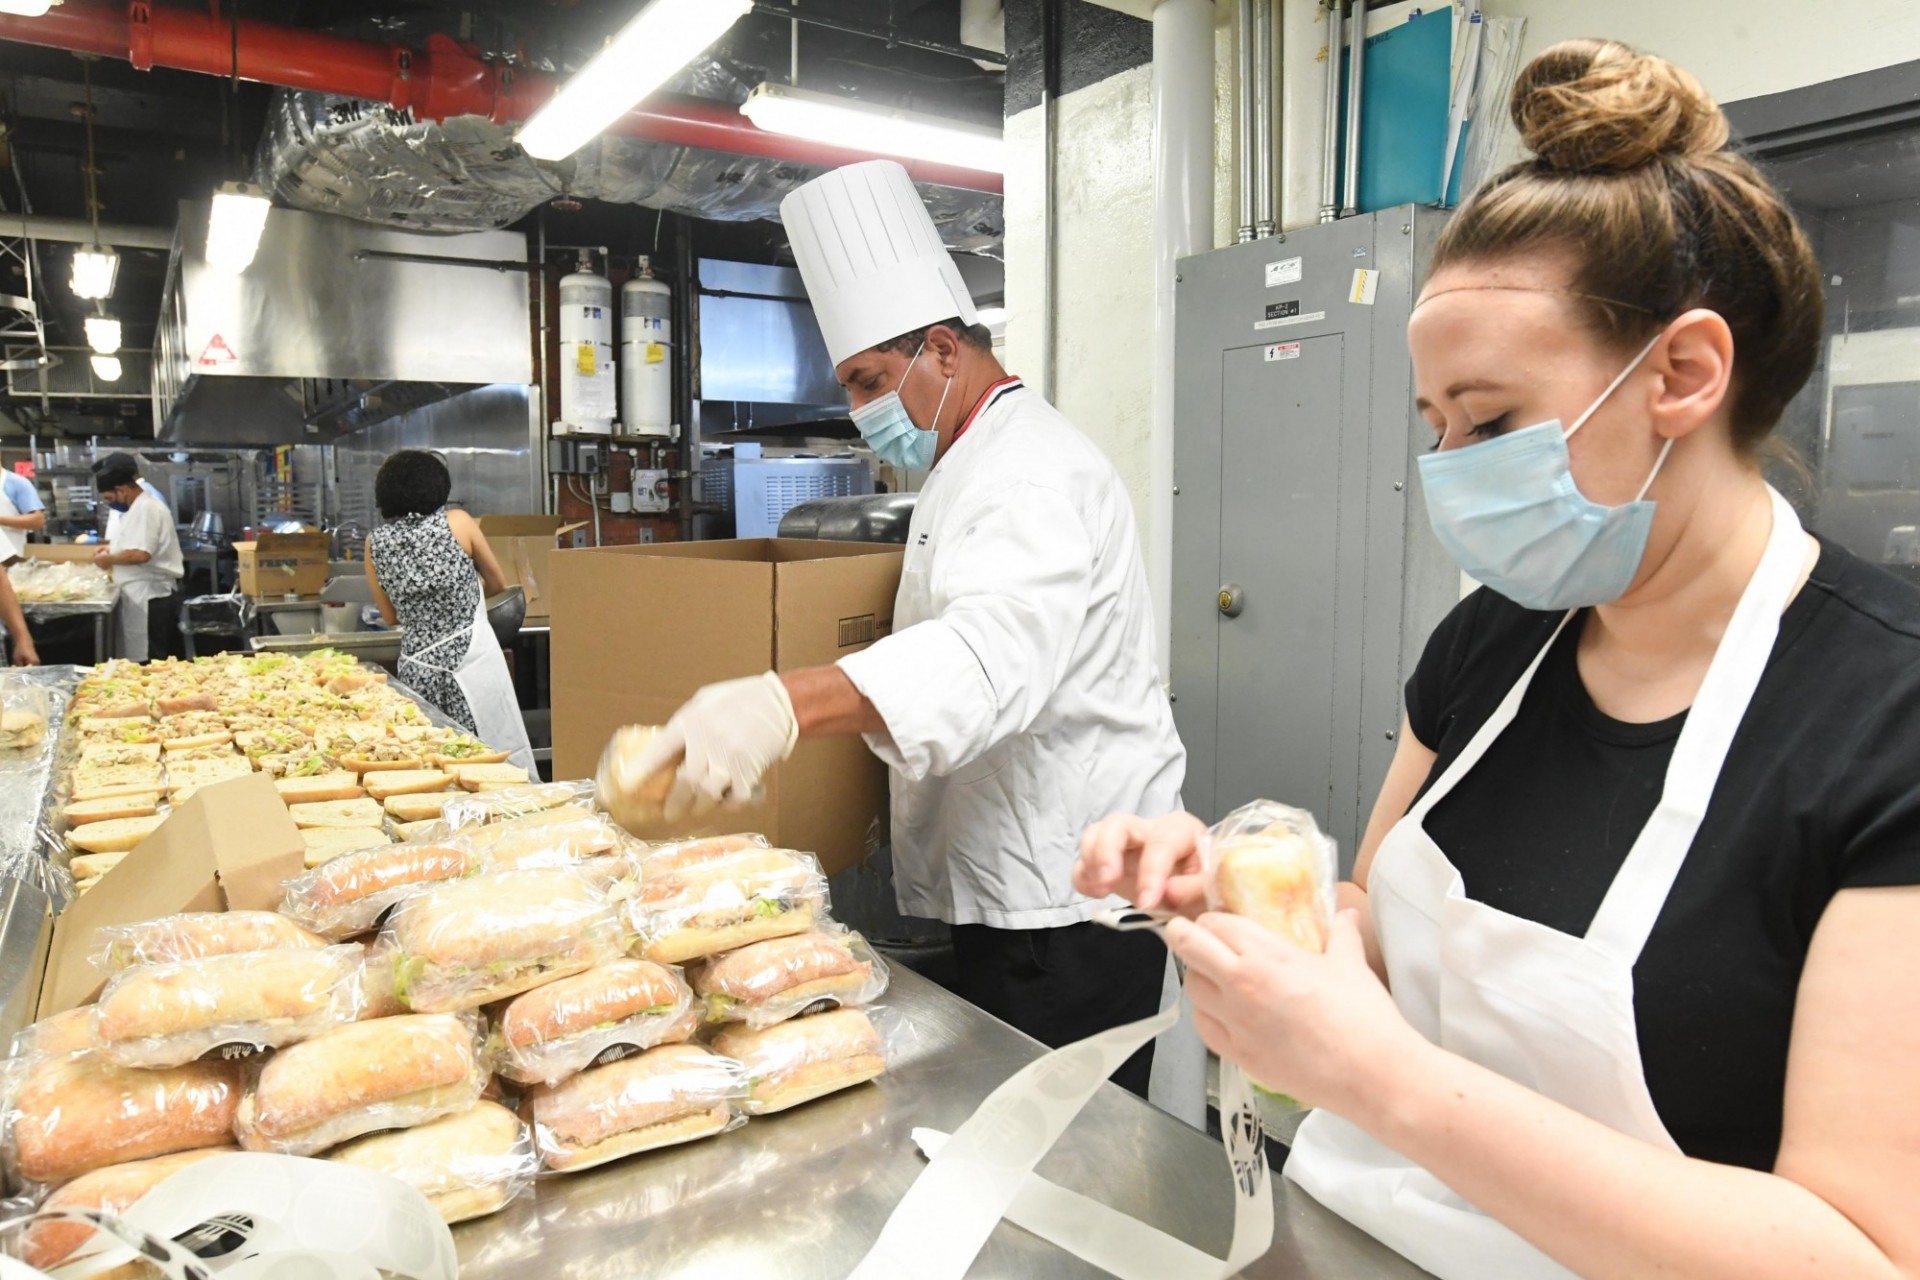 Chef Mike and JJ's Place manager Christina prepare and wrap sandwiches in John Day Dining Hall